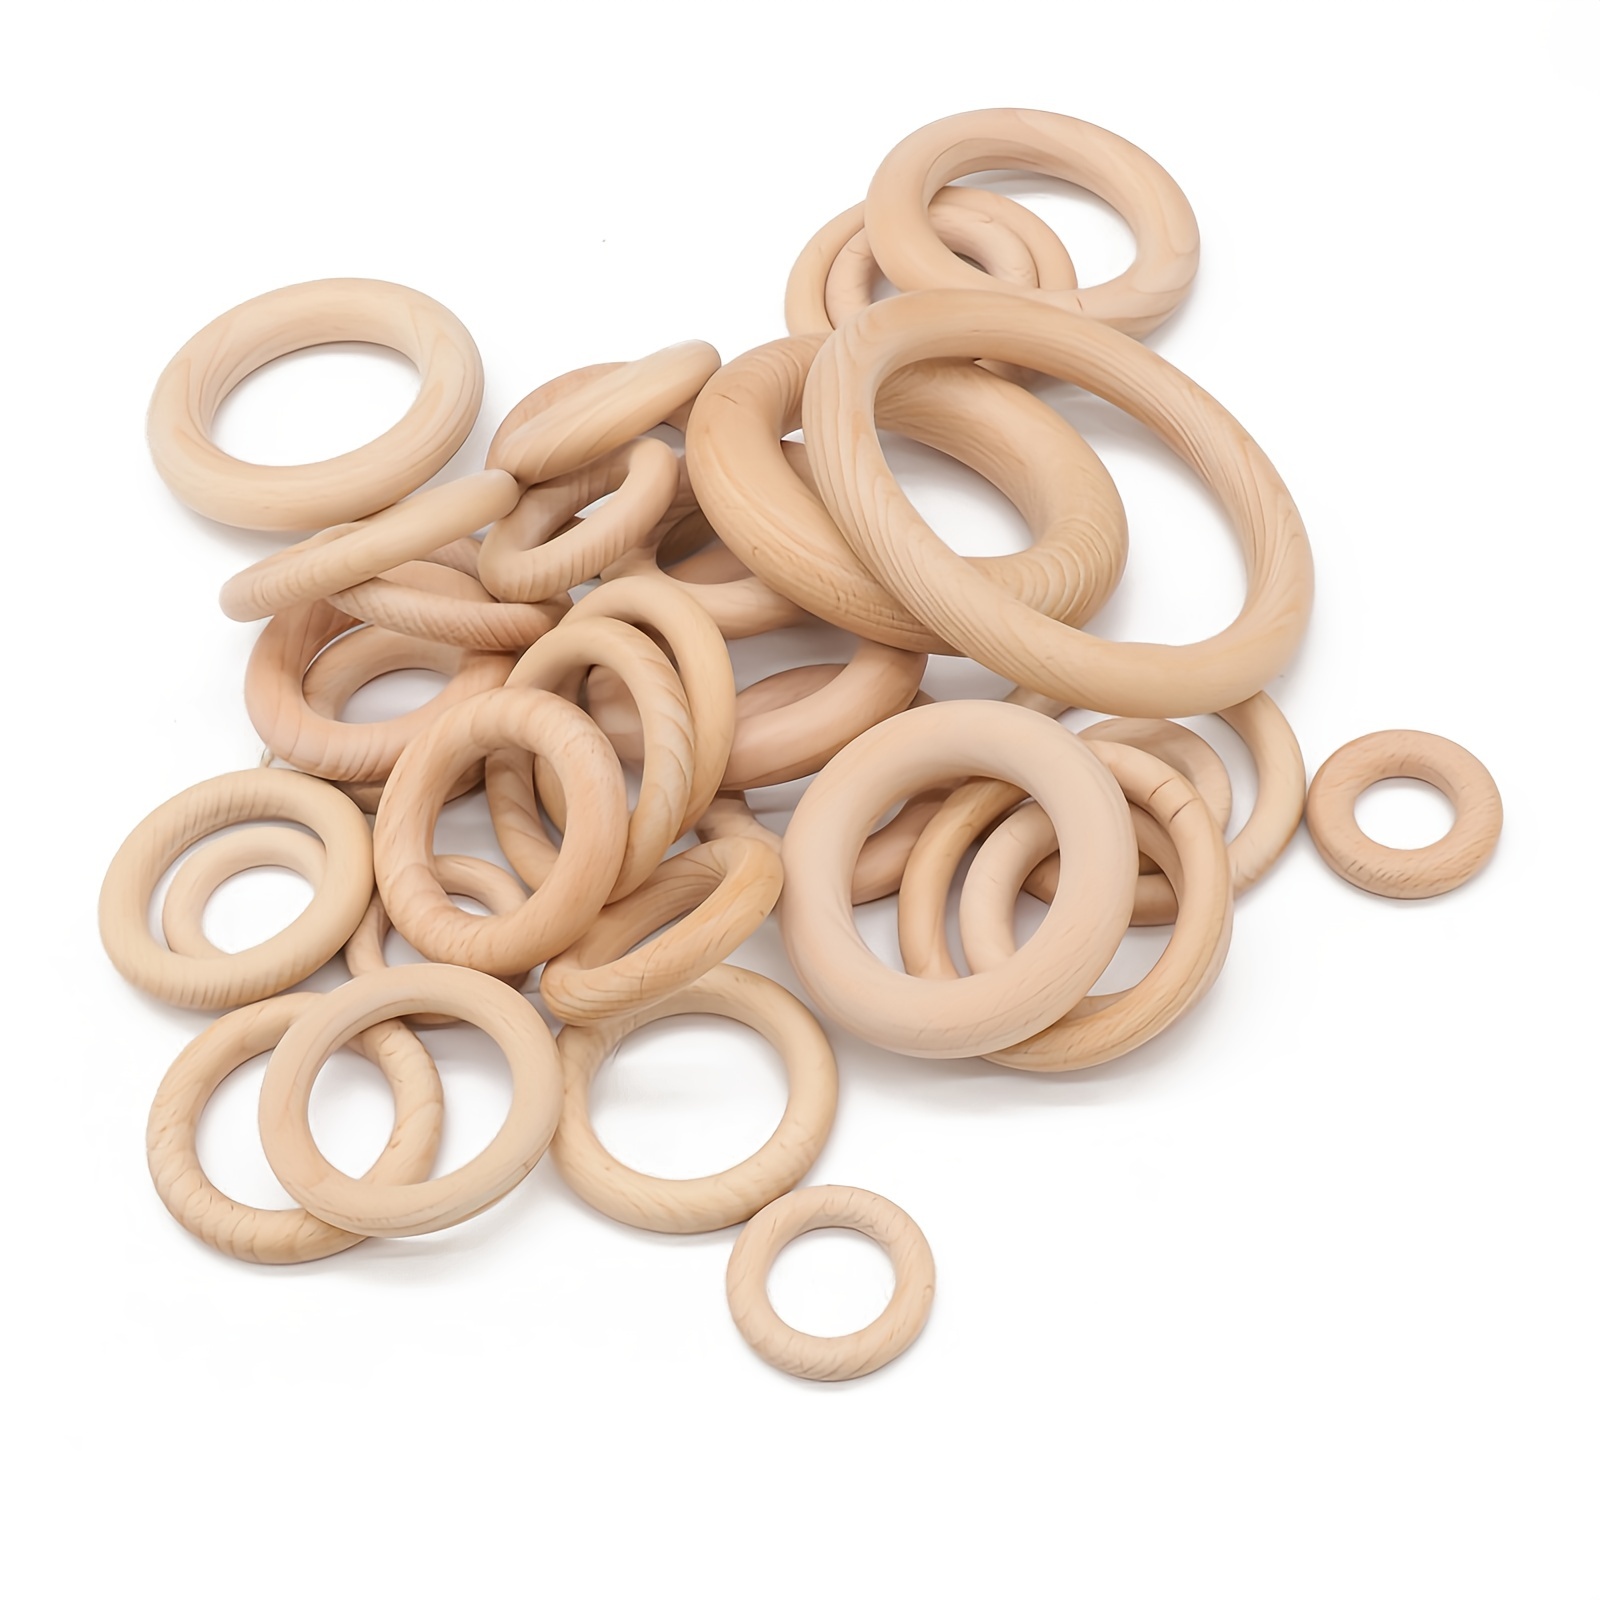 20 Pack Unfinished Natural Wooden Rings for Crafts, Macrame (2.2